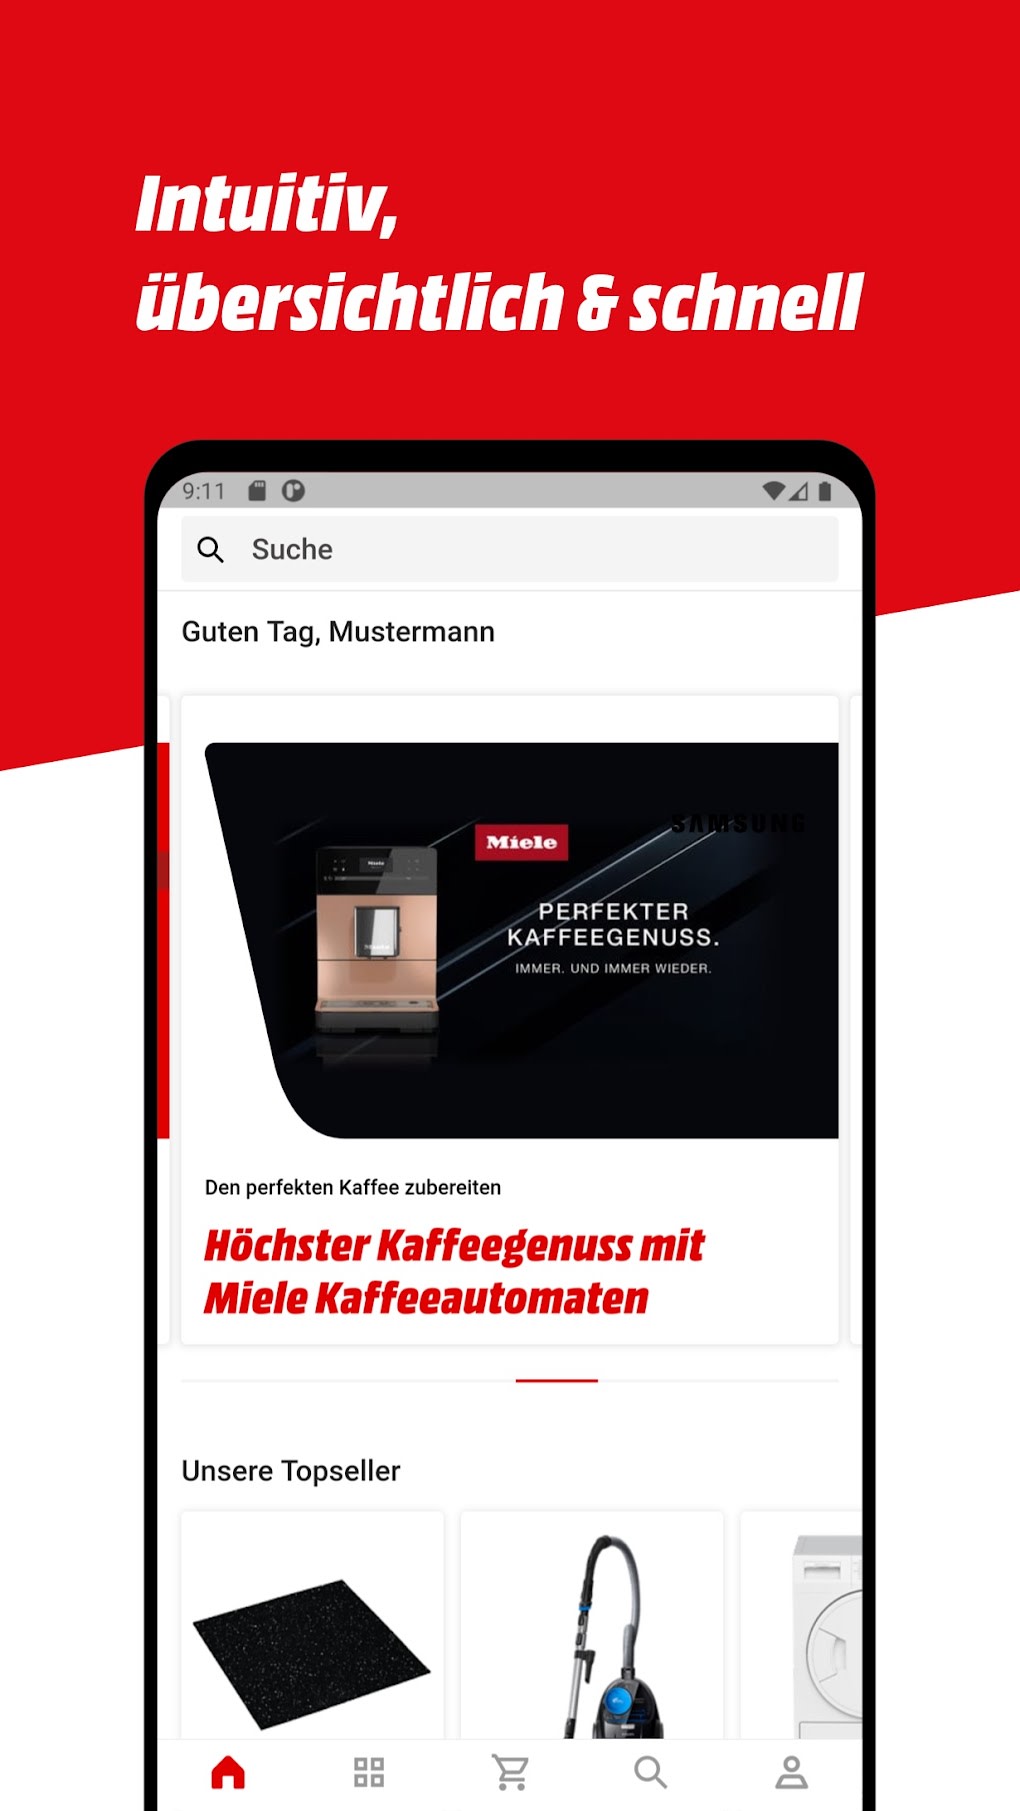 Mediamarkt: Most Up-to-Date Encyclopedia, News & Reviews